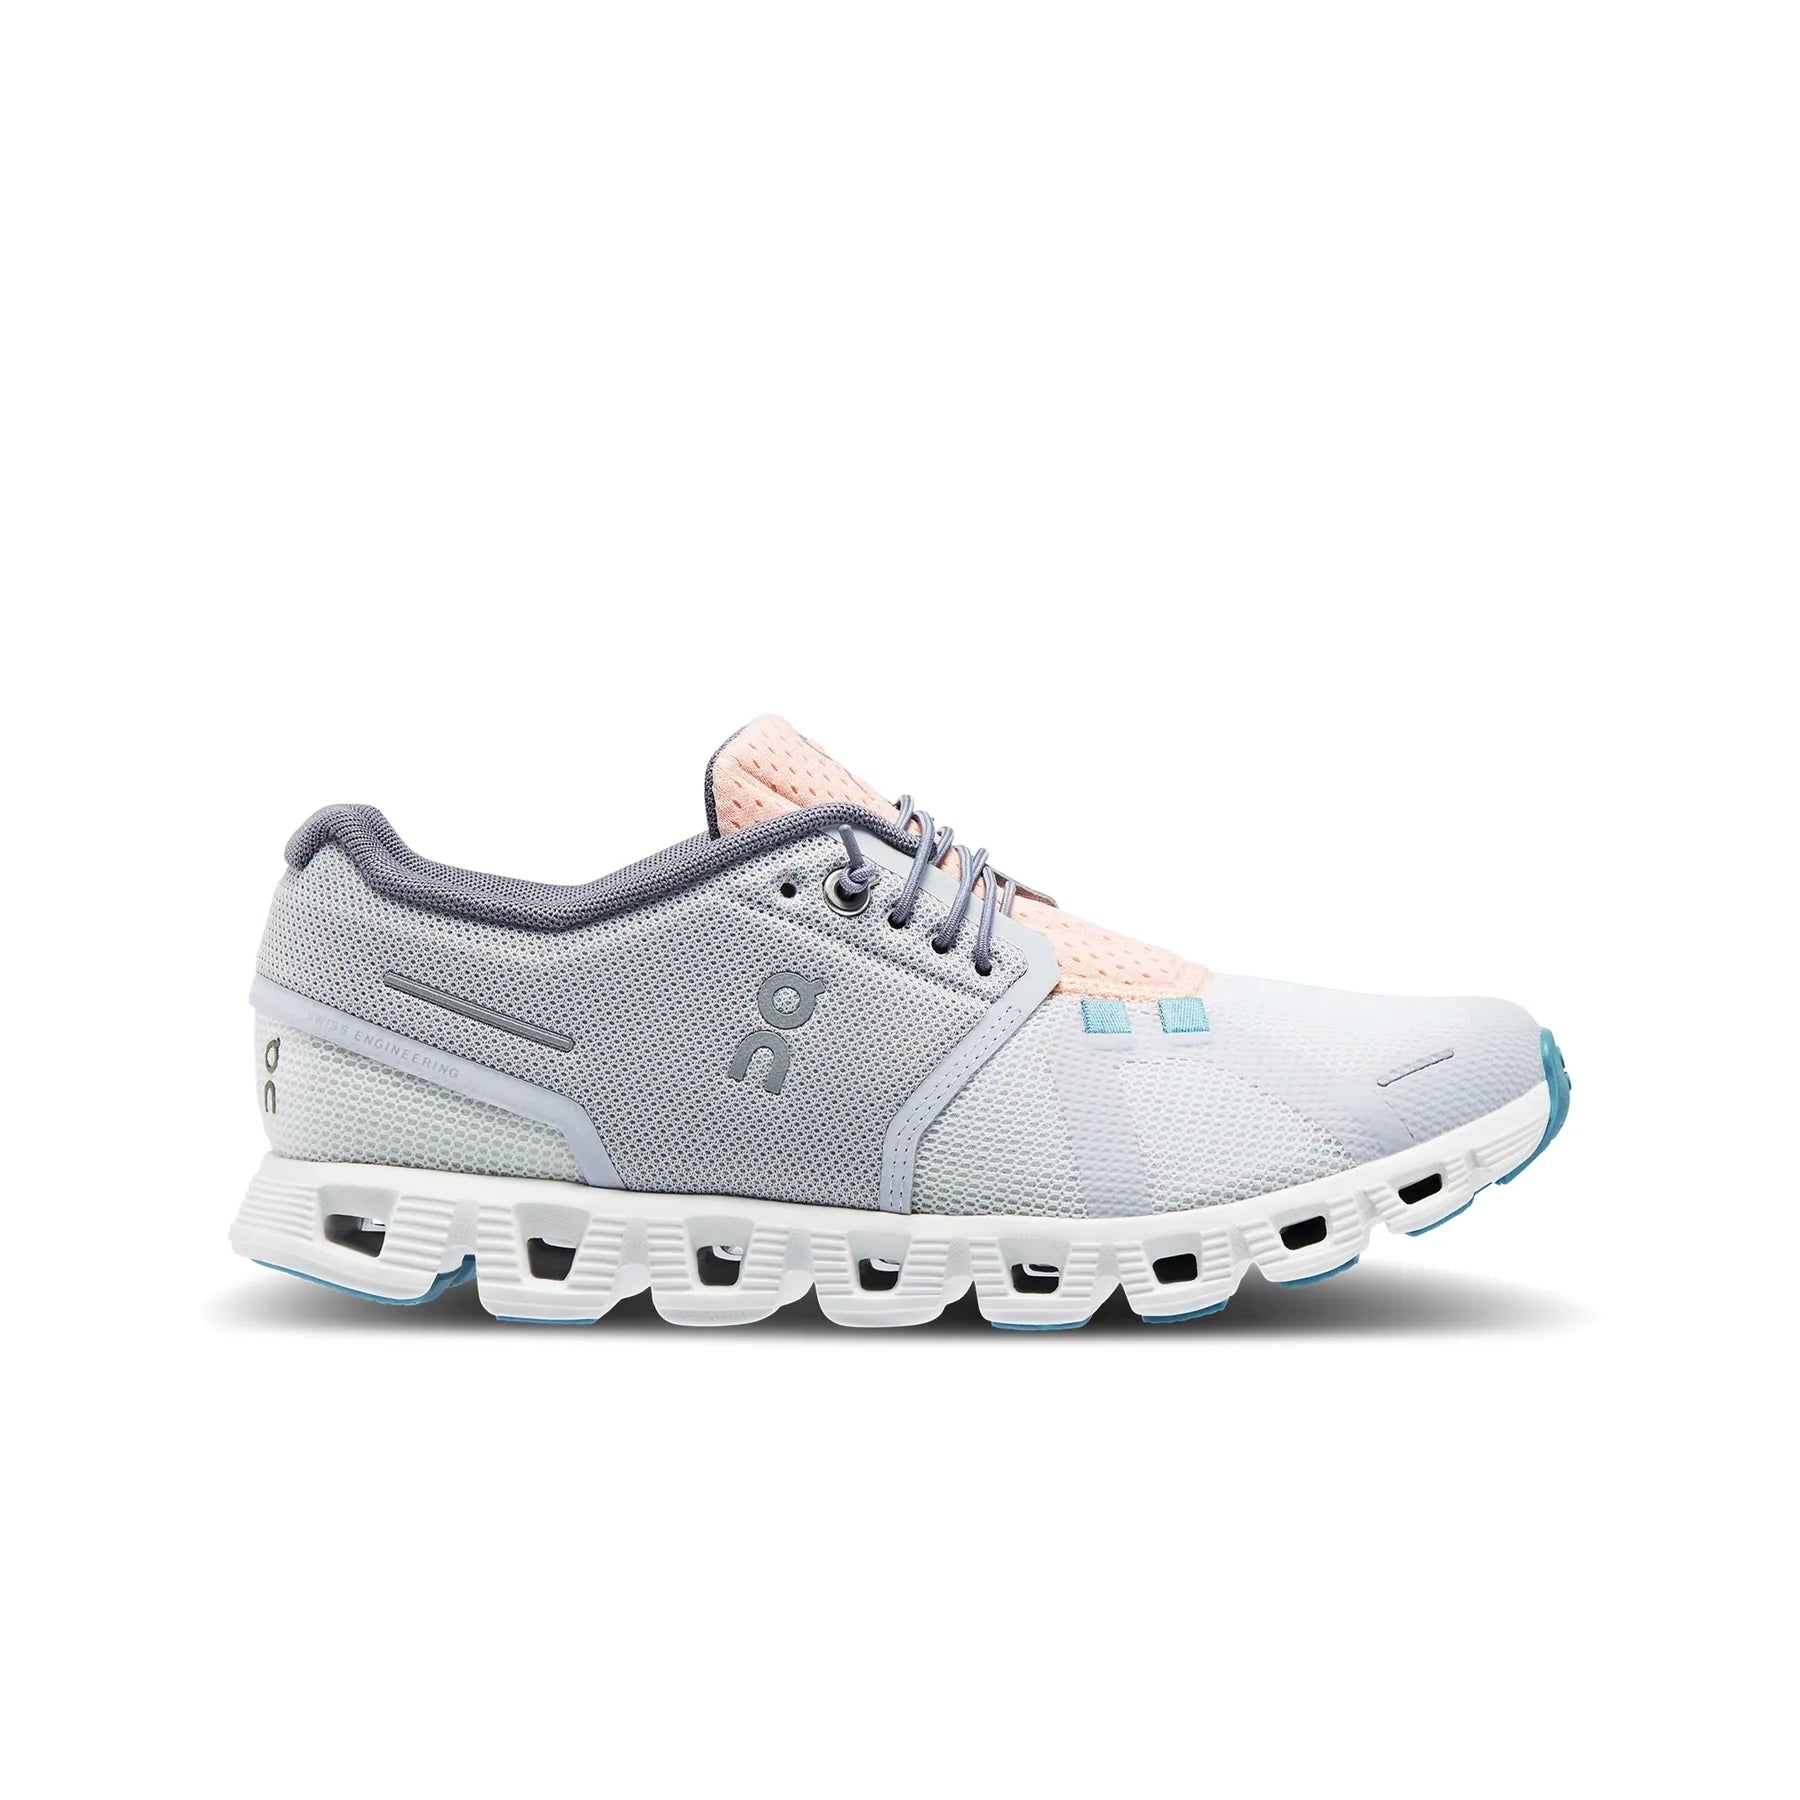 Lateral view of the pair of Women's ON Cloud 5 Push shoes in the color Glacier/Undyed White